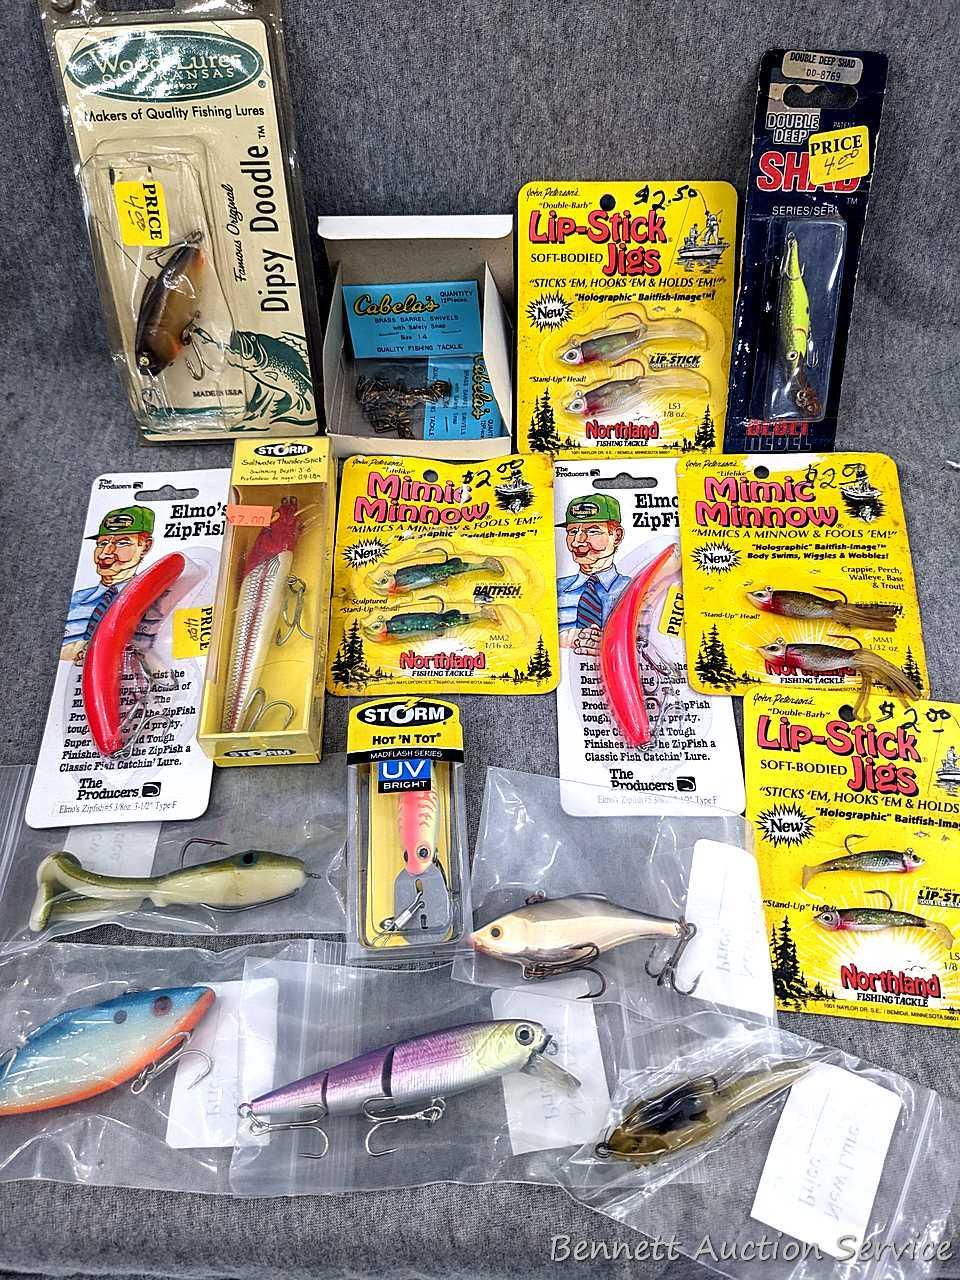 LOT OF 3 The PRODUCERS TOPWATER FISHING LURES NIP